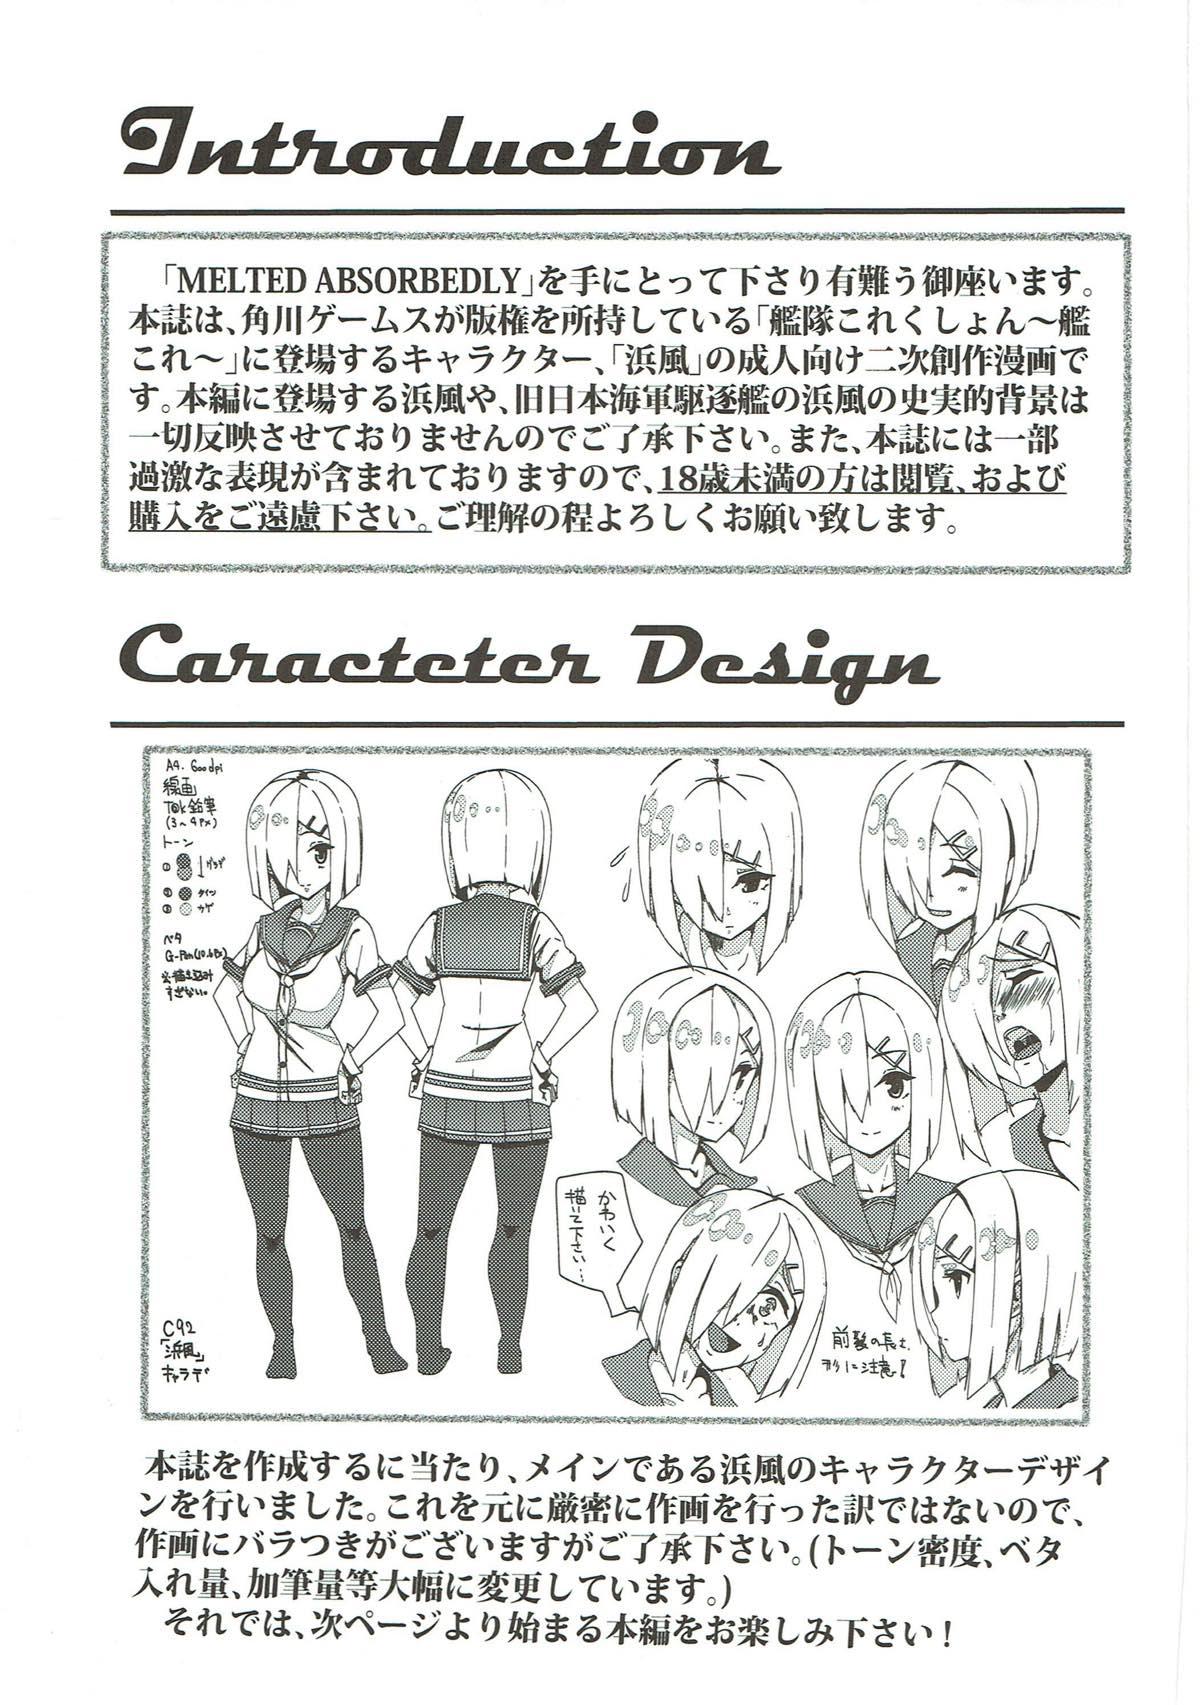 Amature MELTED ABSORBEDLY - Kantai collection Women - Page 2